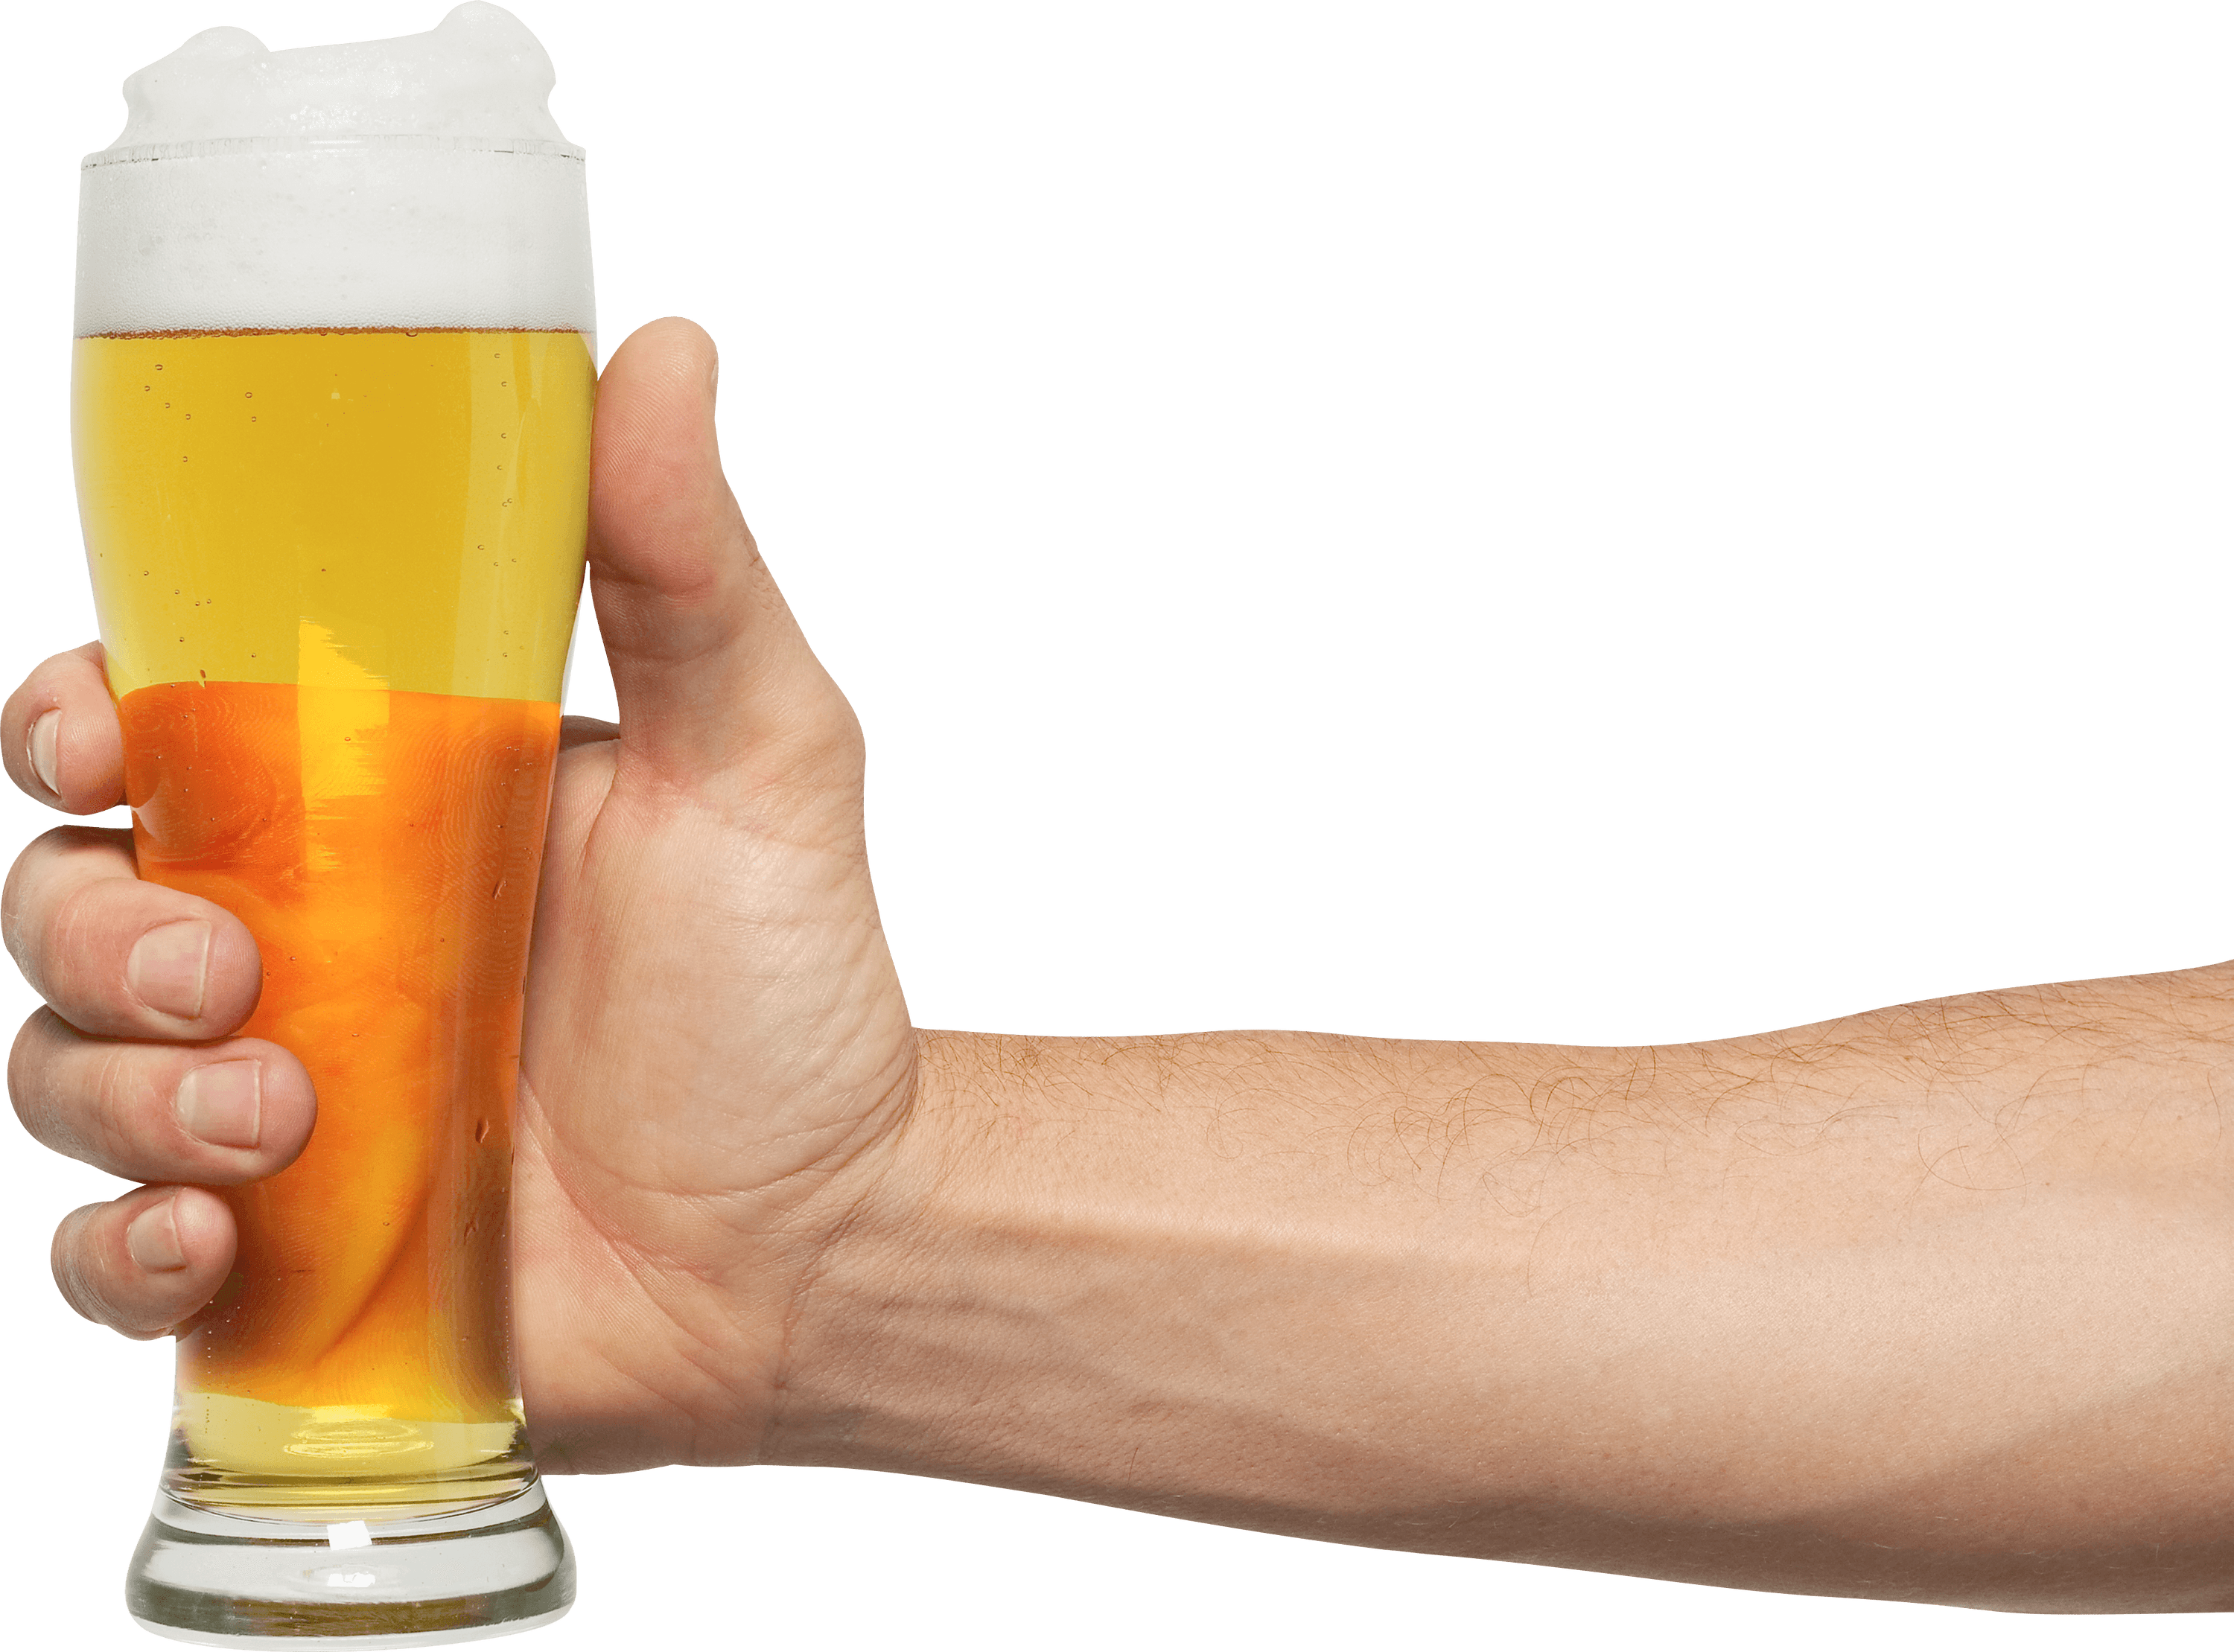 clipart beer hand holding